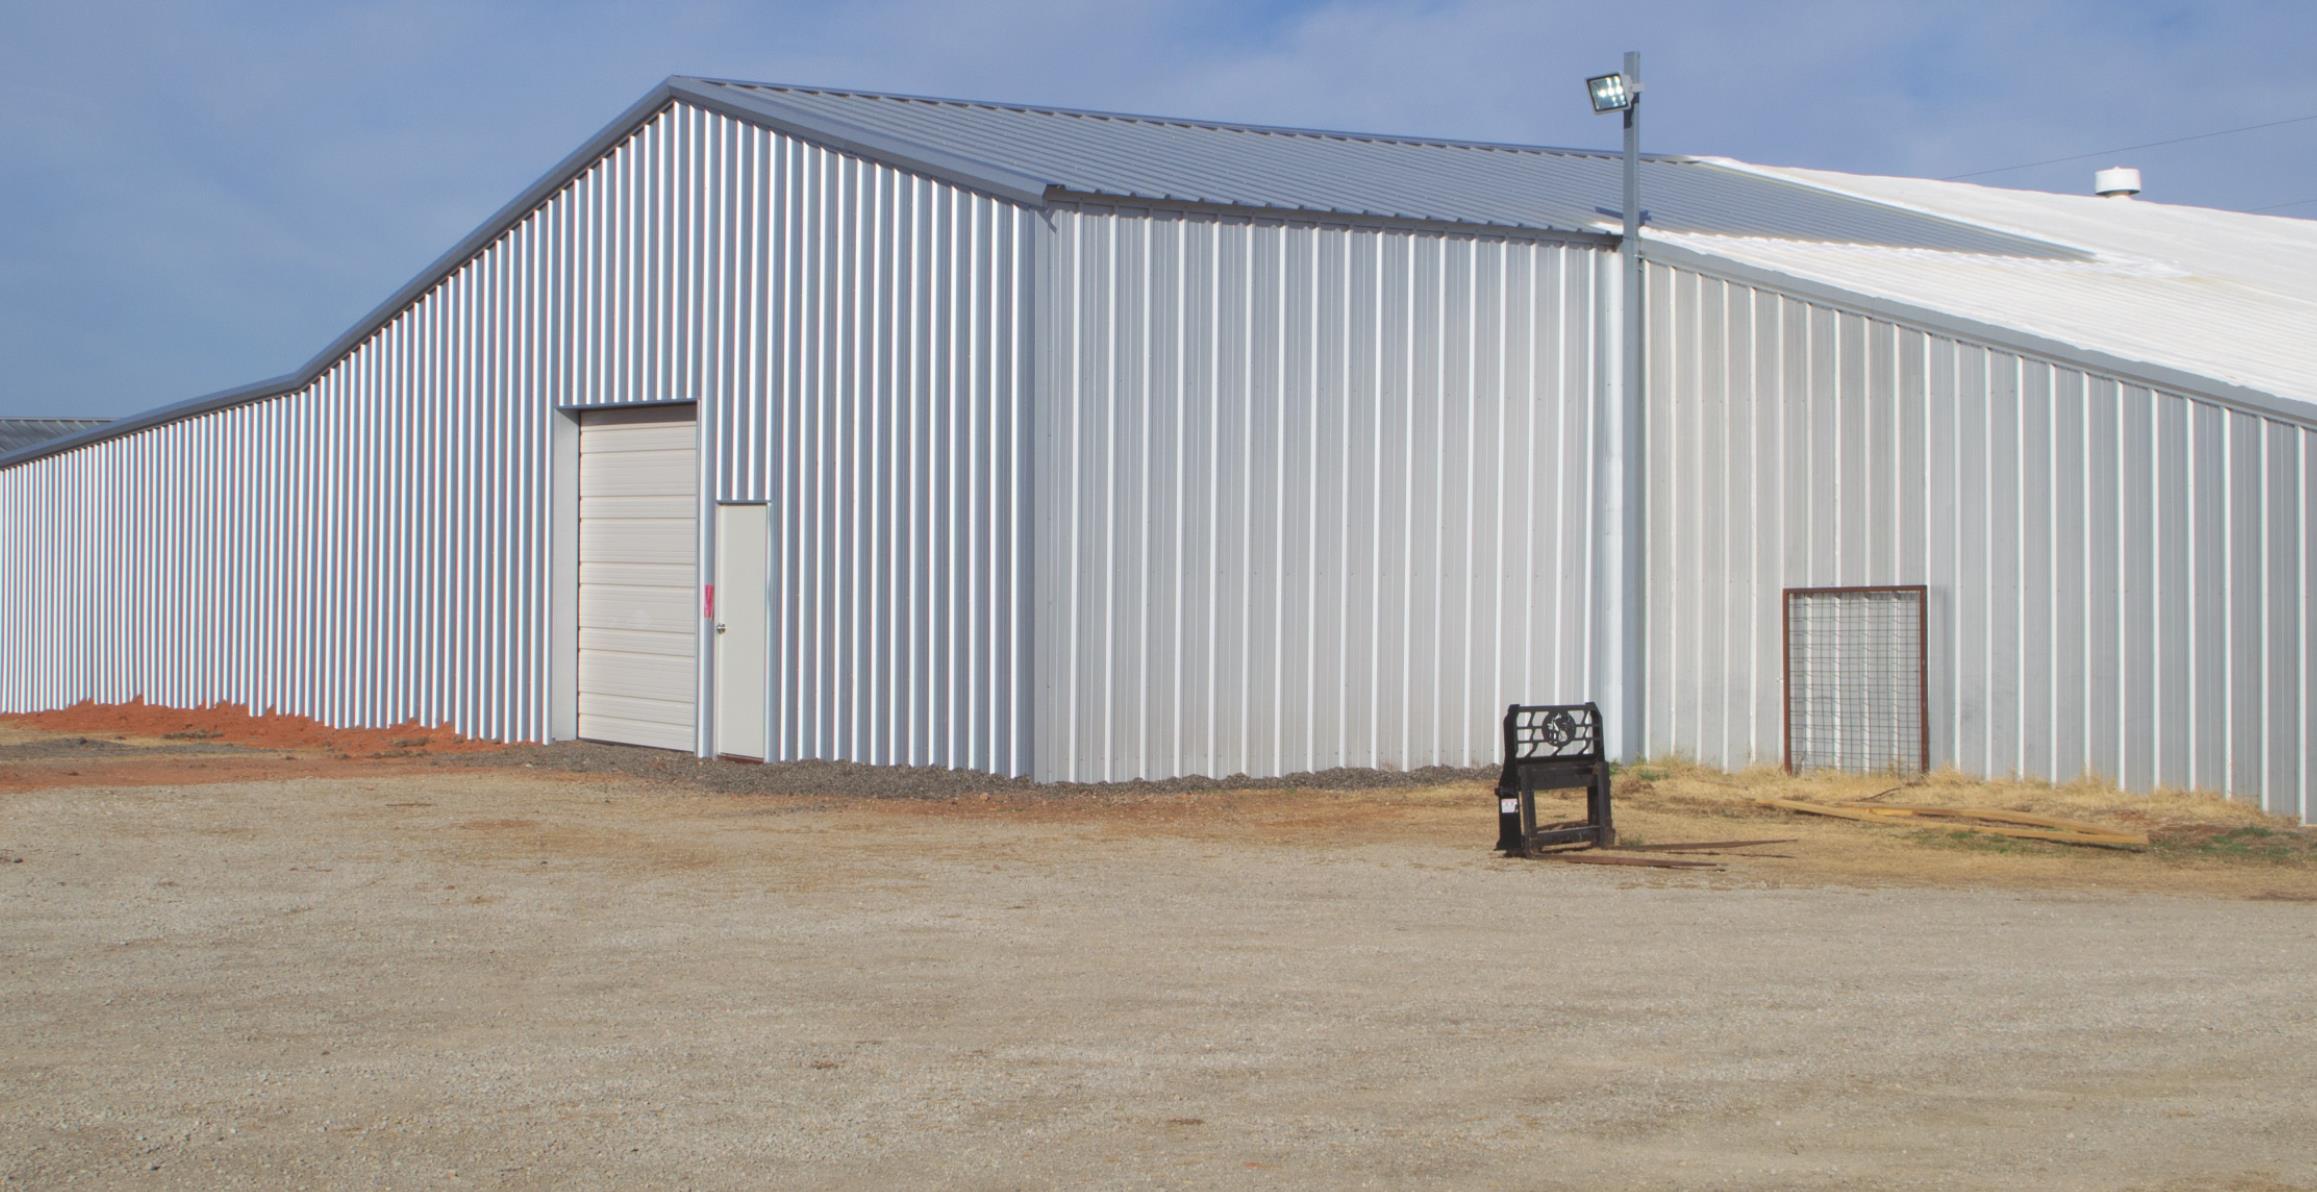 Show Barn expansion project complete in time for Junior Livestock Show